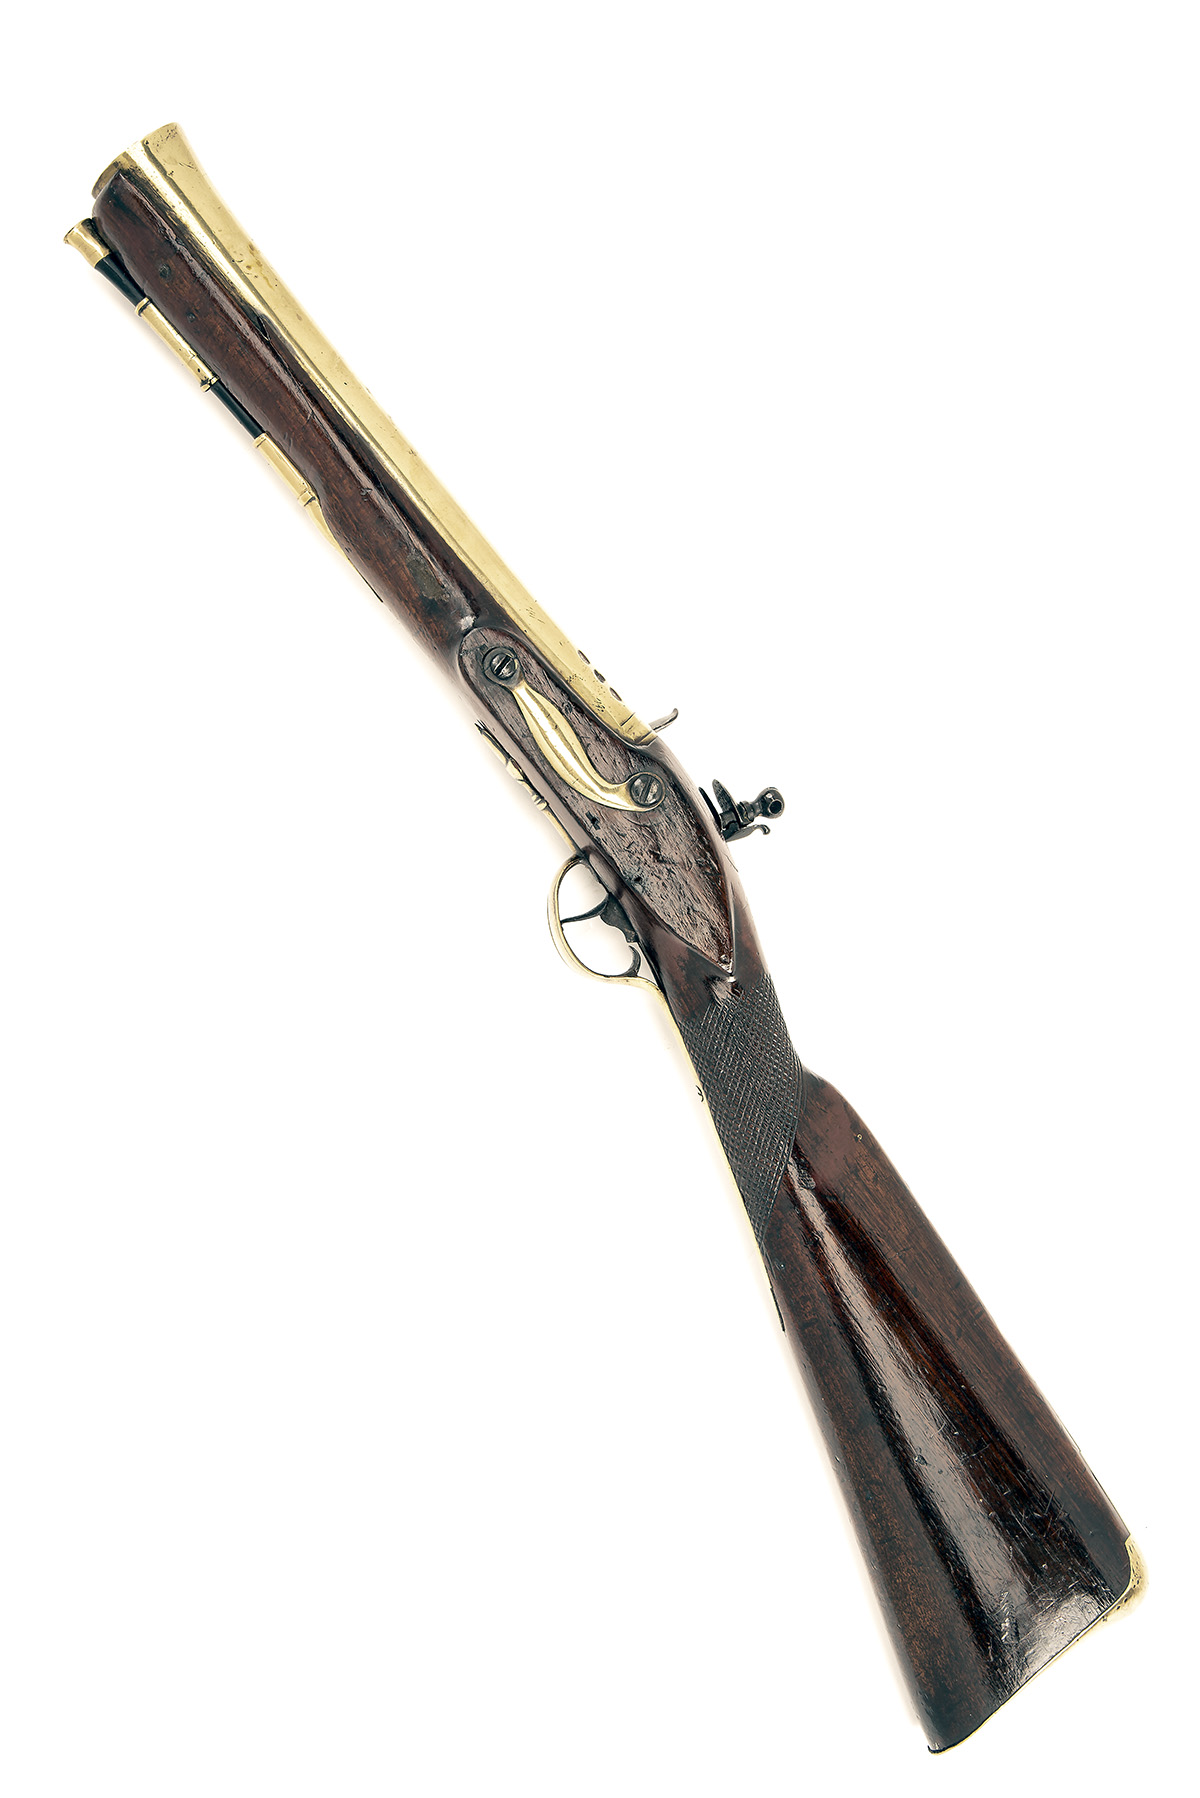 A 12-BORE FLINTLOCK BRASS-BARRELLED BLUNDERBUSS, UNSIGNED, no visible serial number, English circa - Image 2 of 4